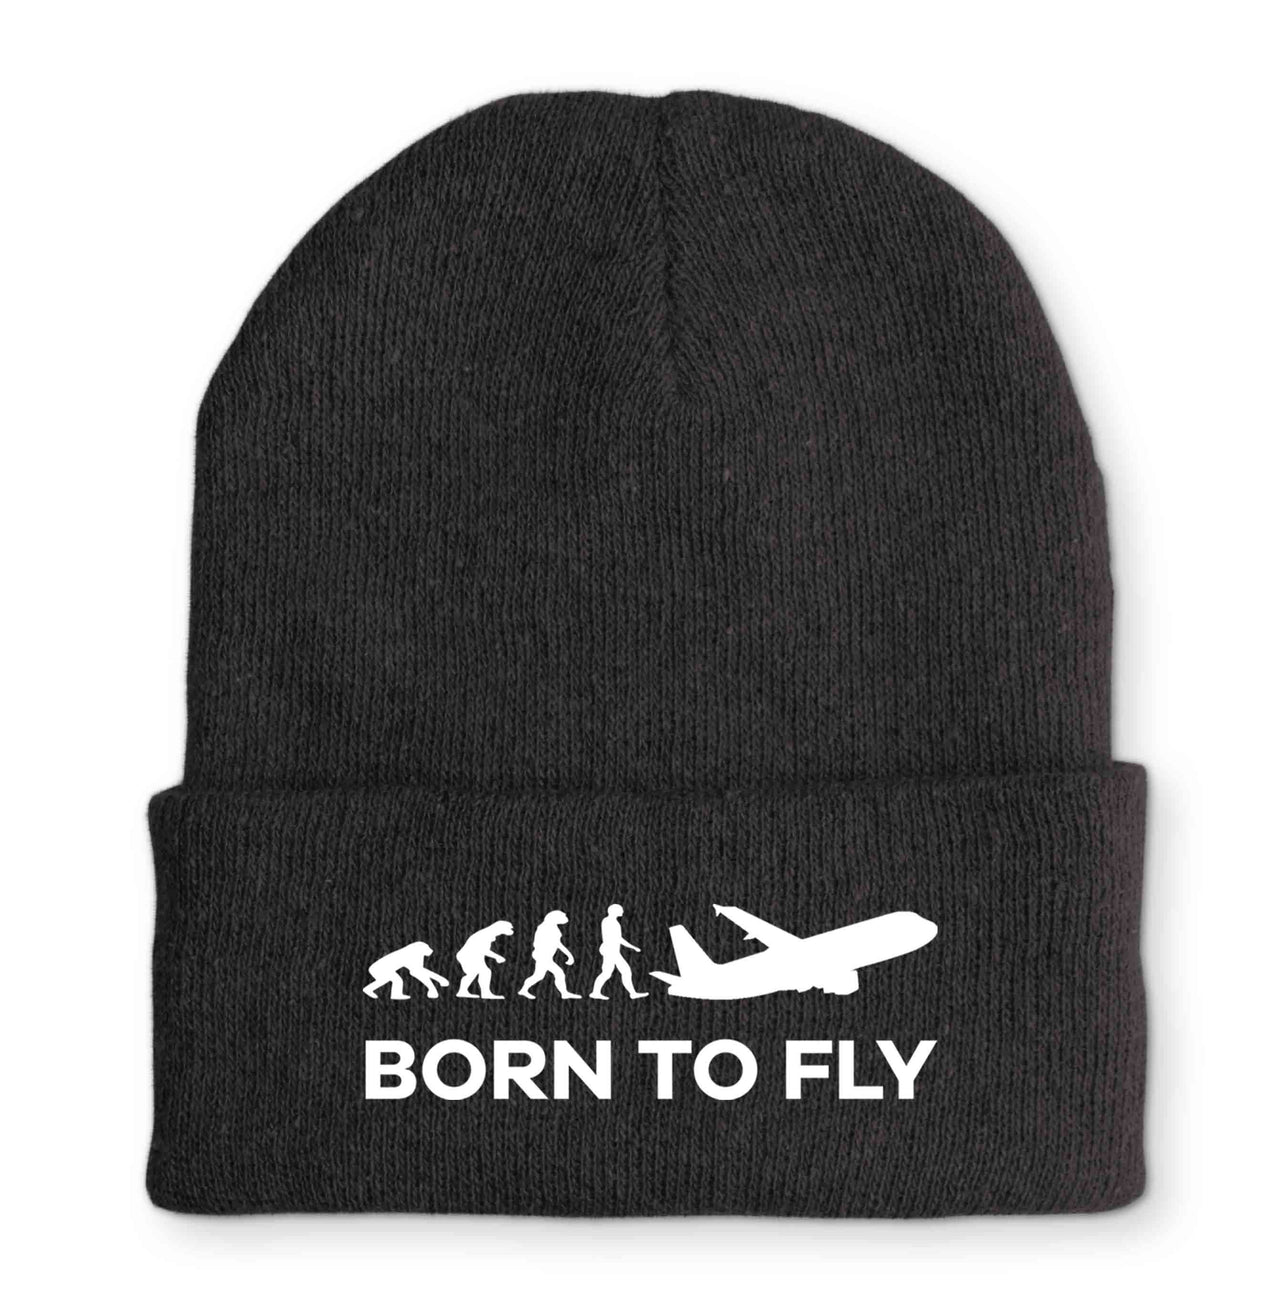 Born To Fly Airplane Embroidered Beanies